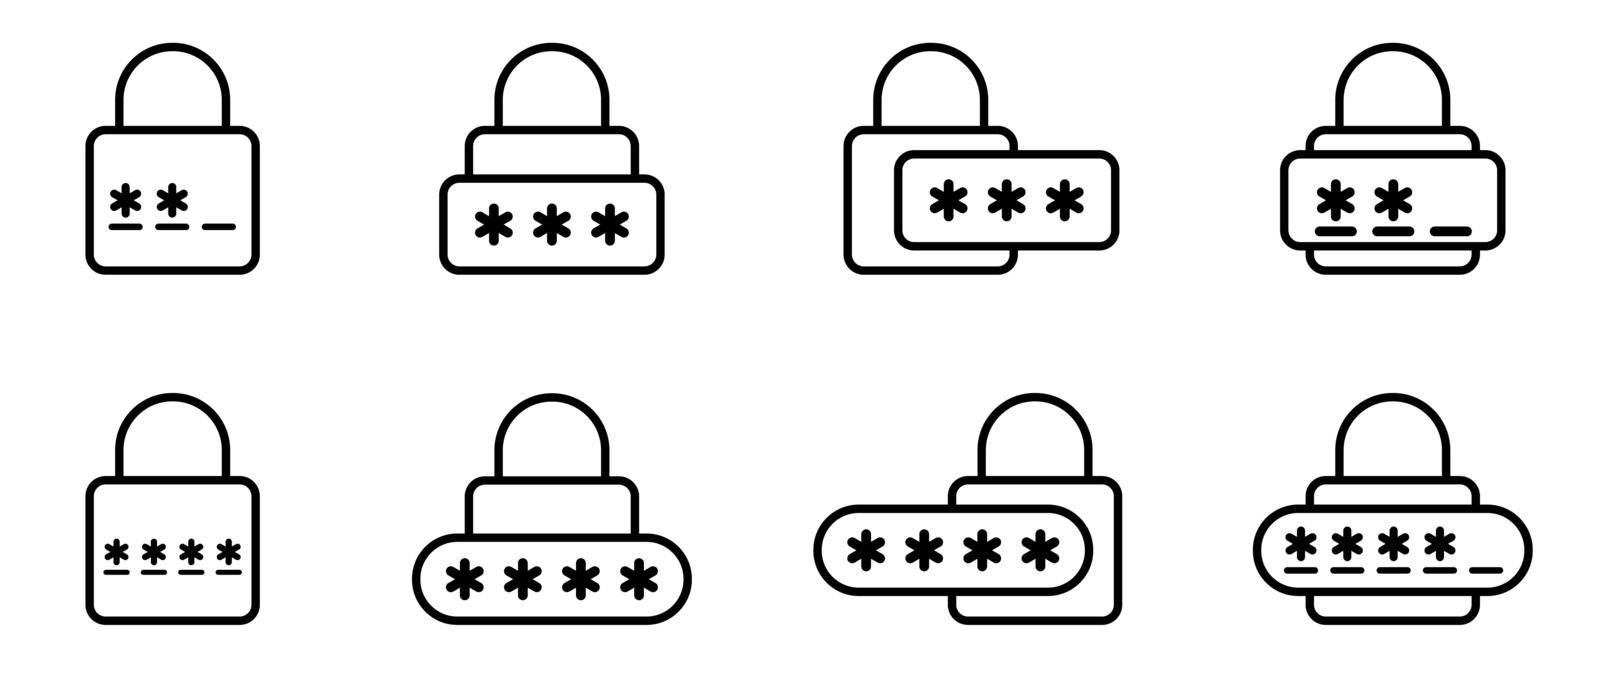 Password icon. Login icon. Vector illustration. Set of varied pincode flat icons. Cyber security black icons.